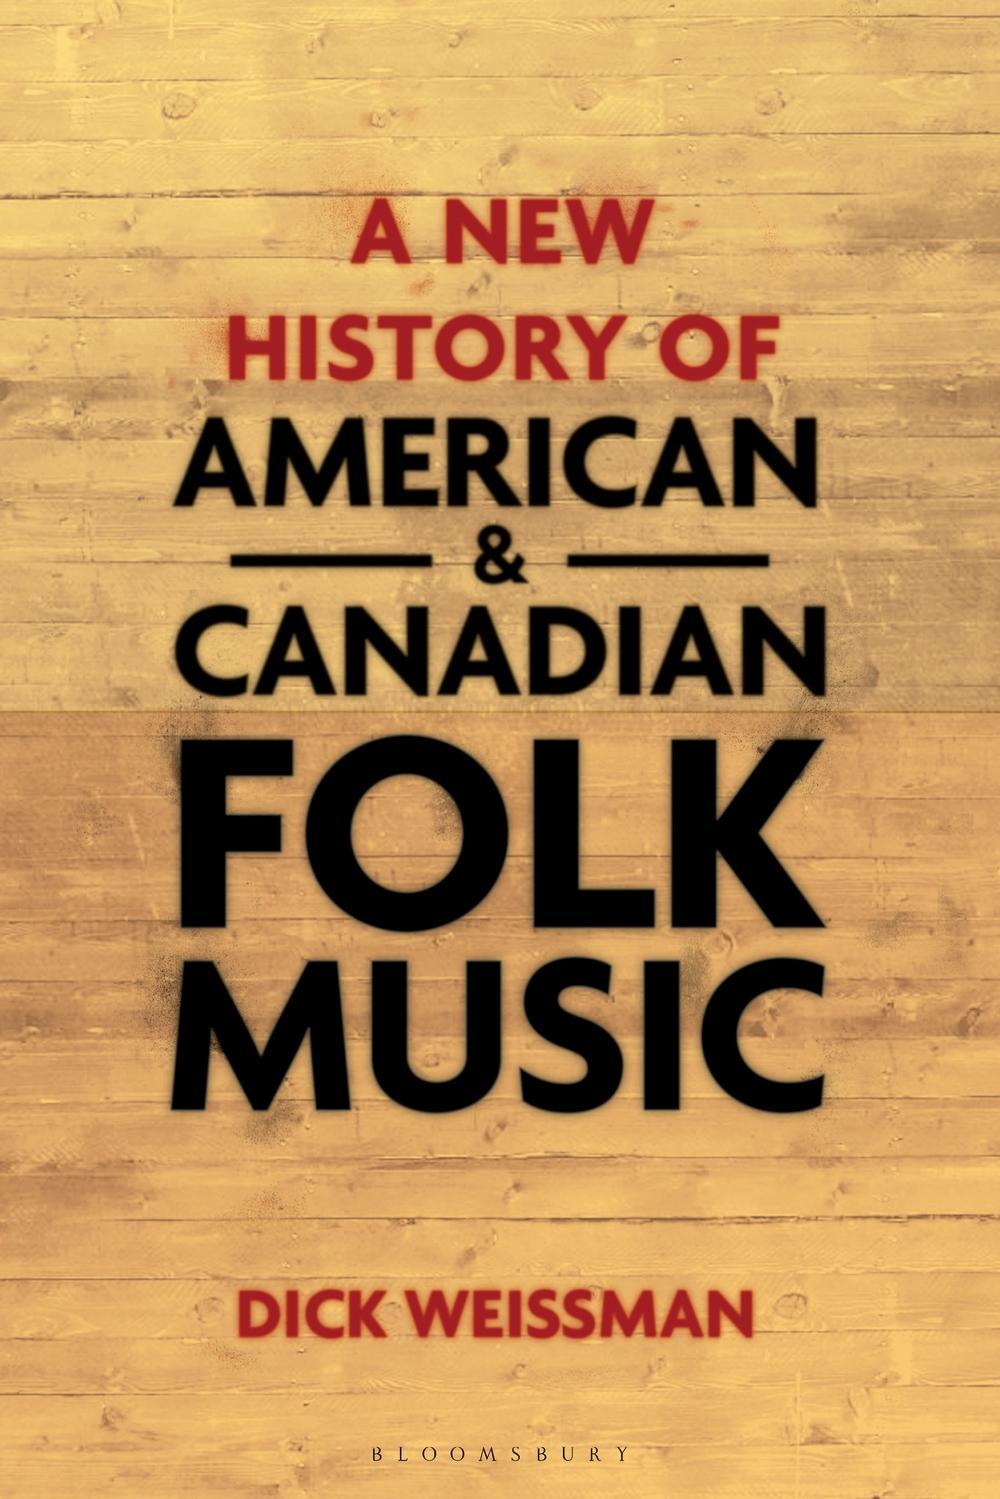 New History of American and Canadian Folk Music - Dick Weissman